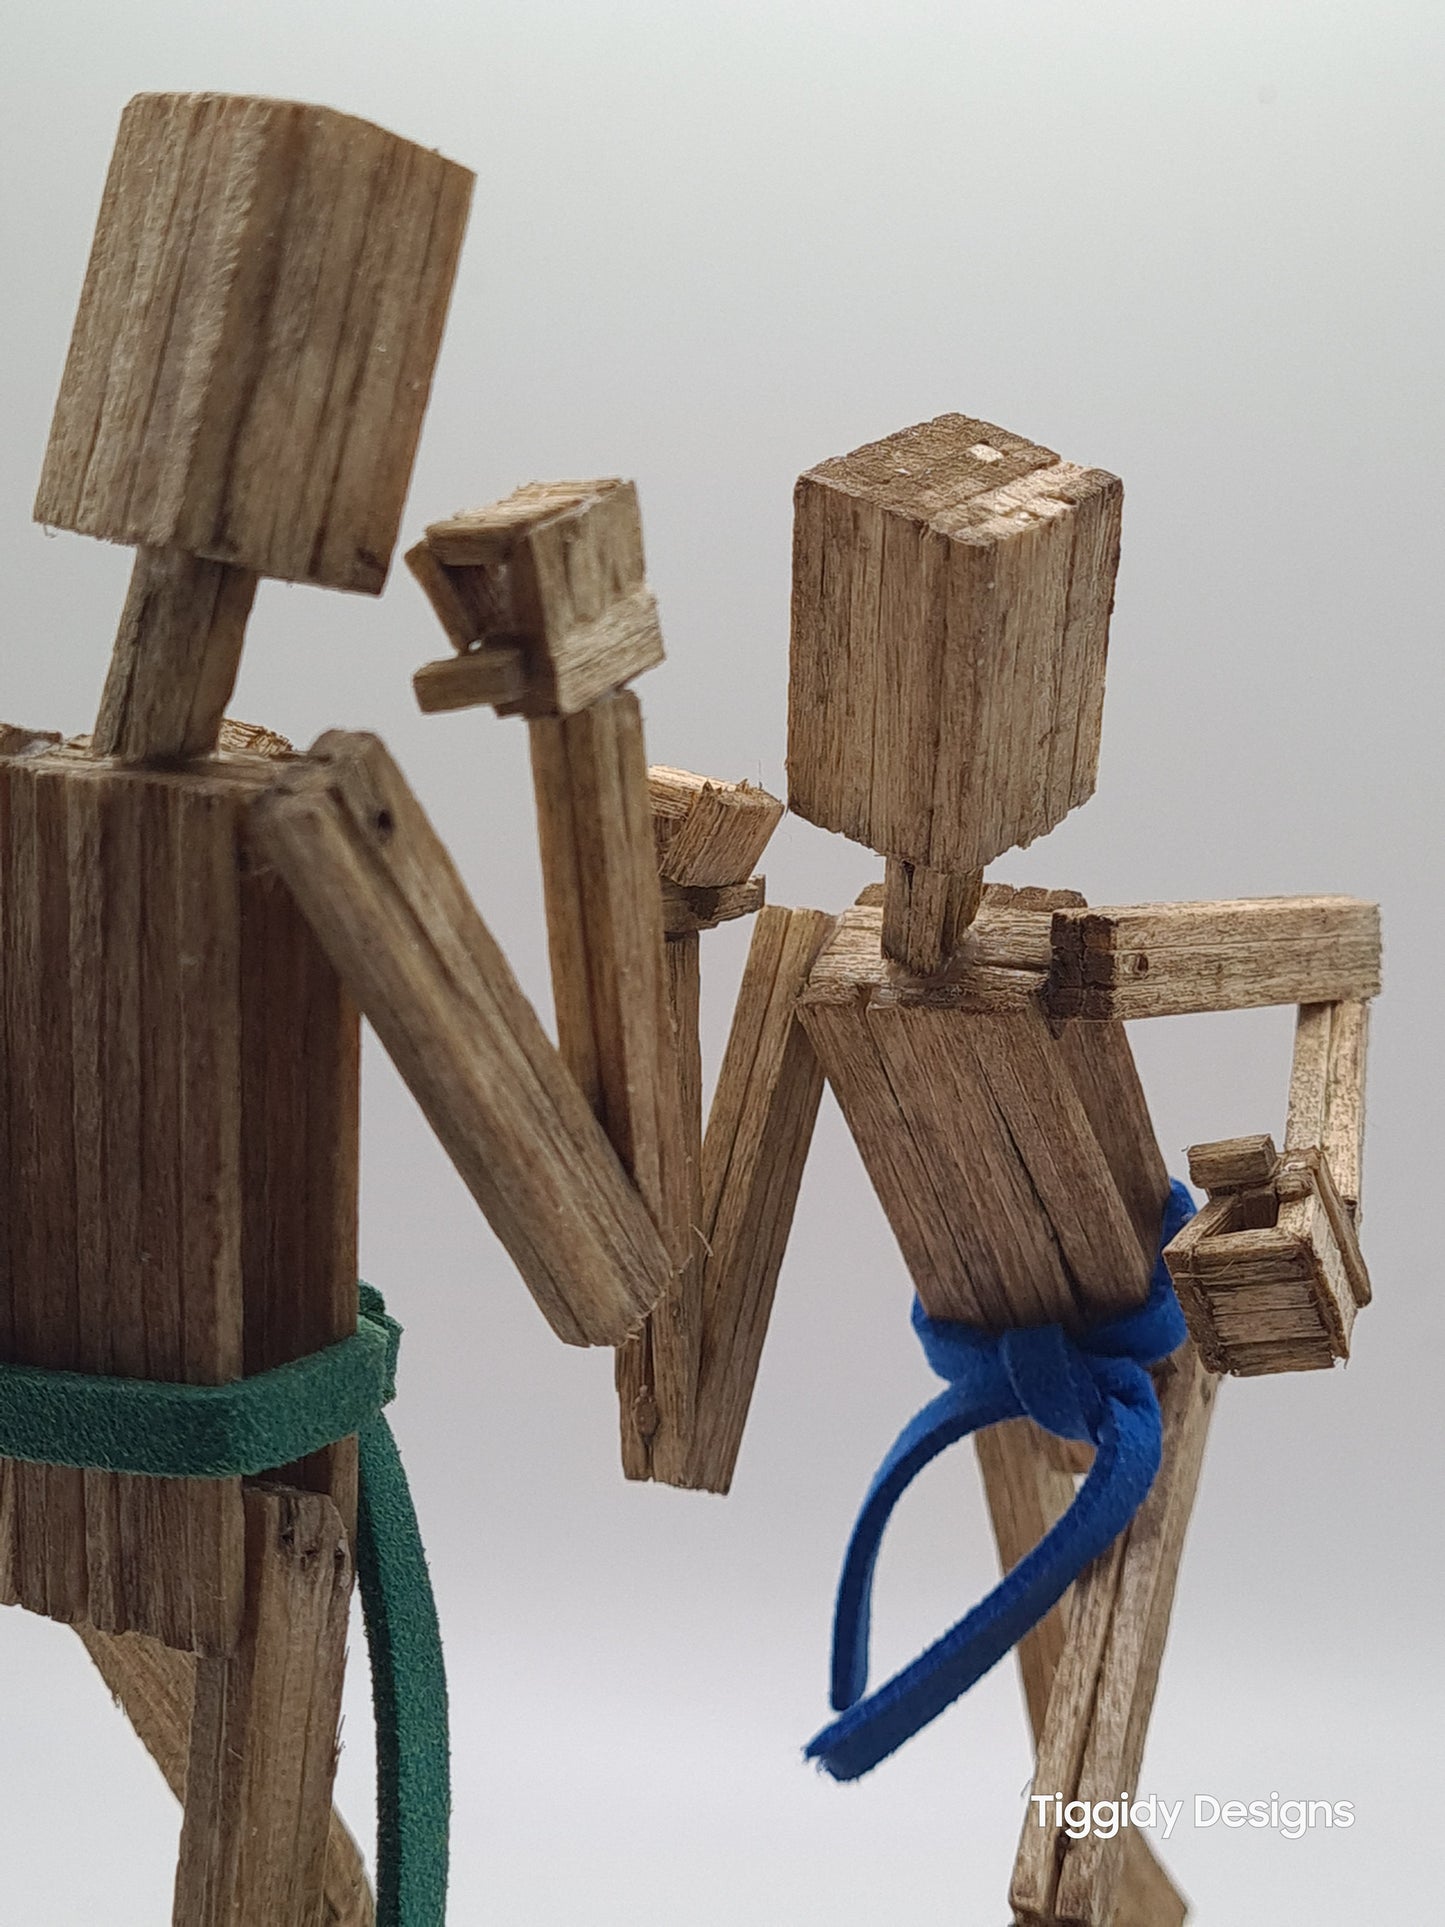 Time To Box - Handcrafted Wooden Matchstick Figures - Gifts, Ornaments and Decor By Tiggidy Designs